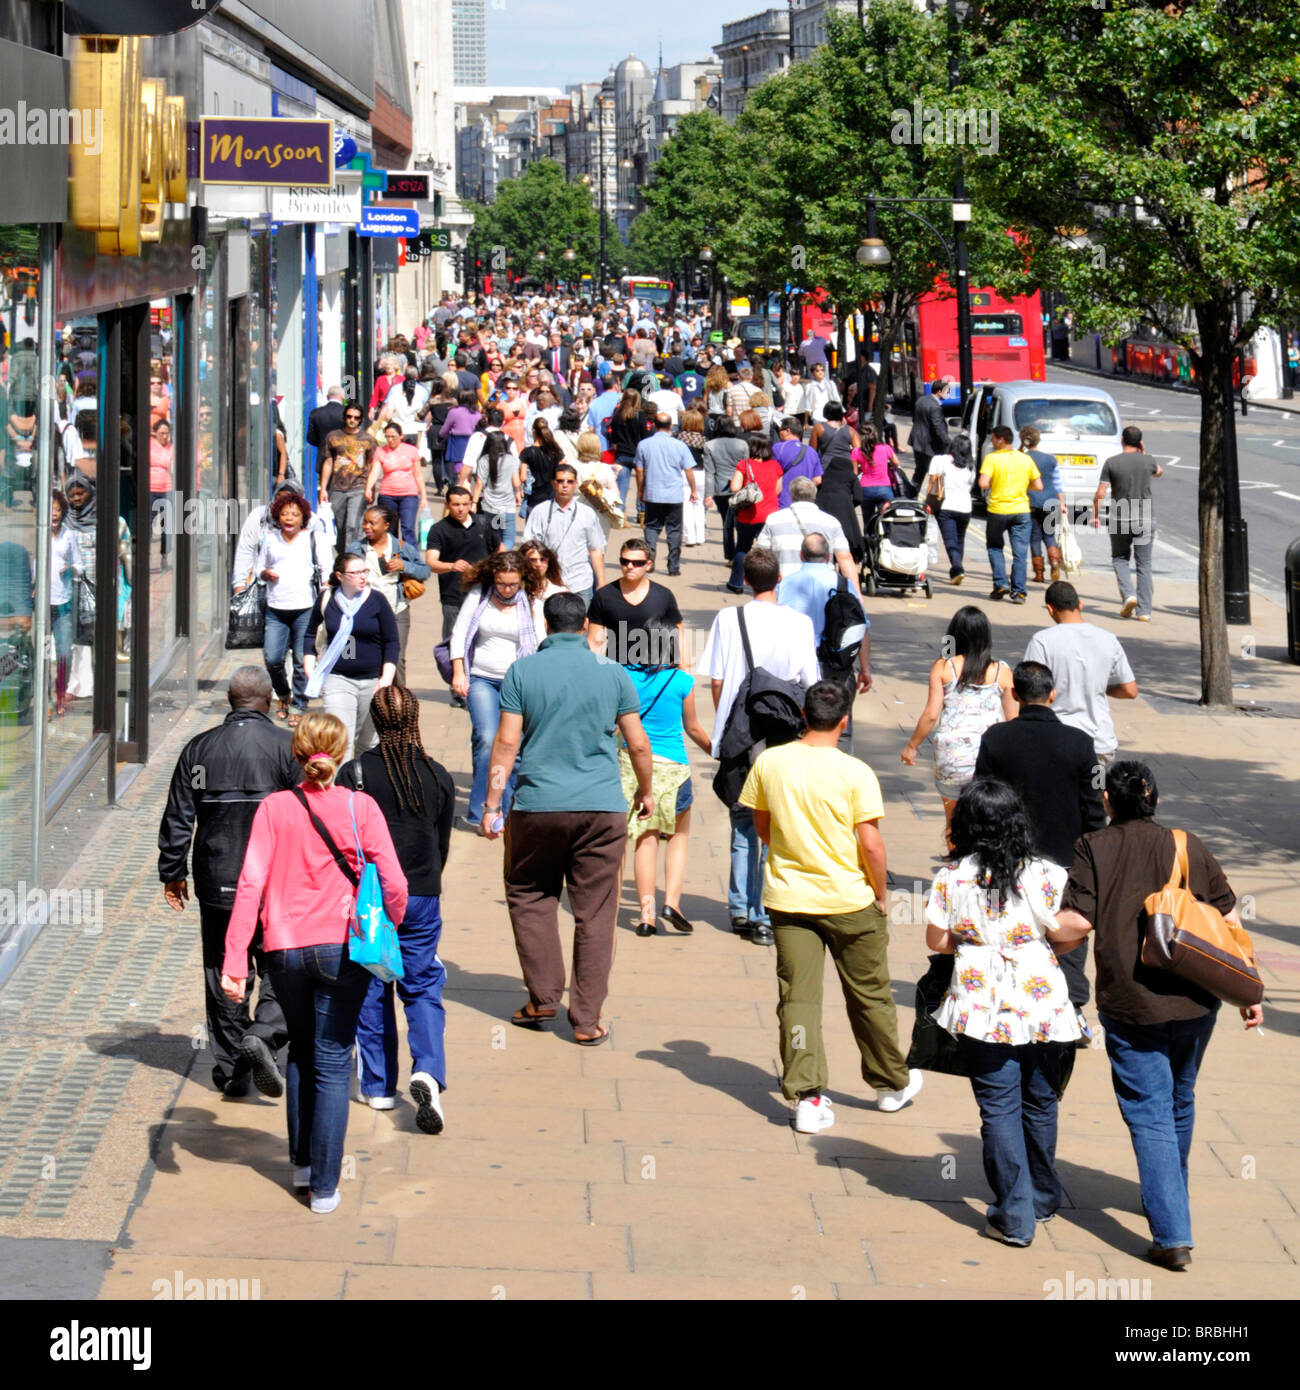 Crowd of shoppers & tourists view from above walking on busy Oxford Street pavement famous West End shopping street & shop fronts summer day London UK Stock Photo